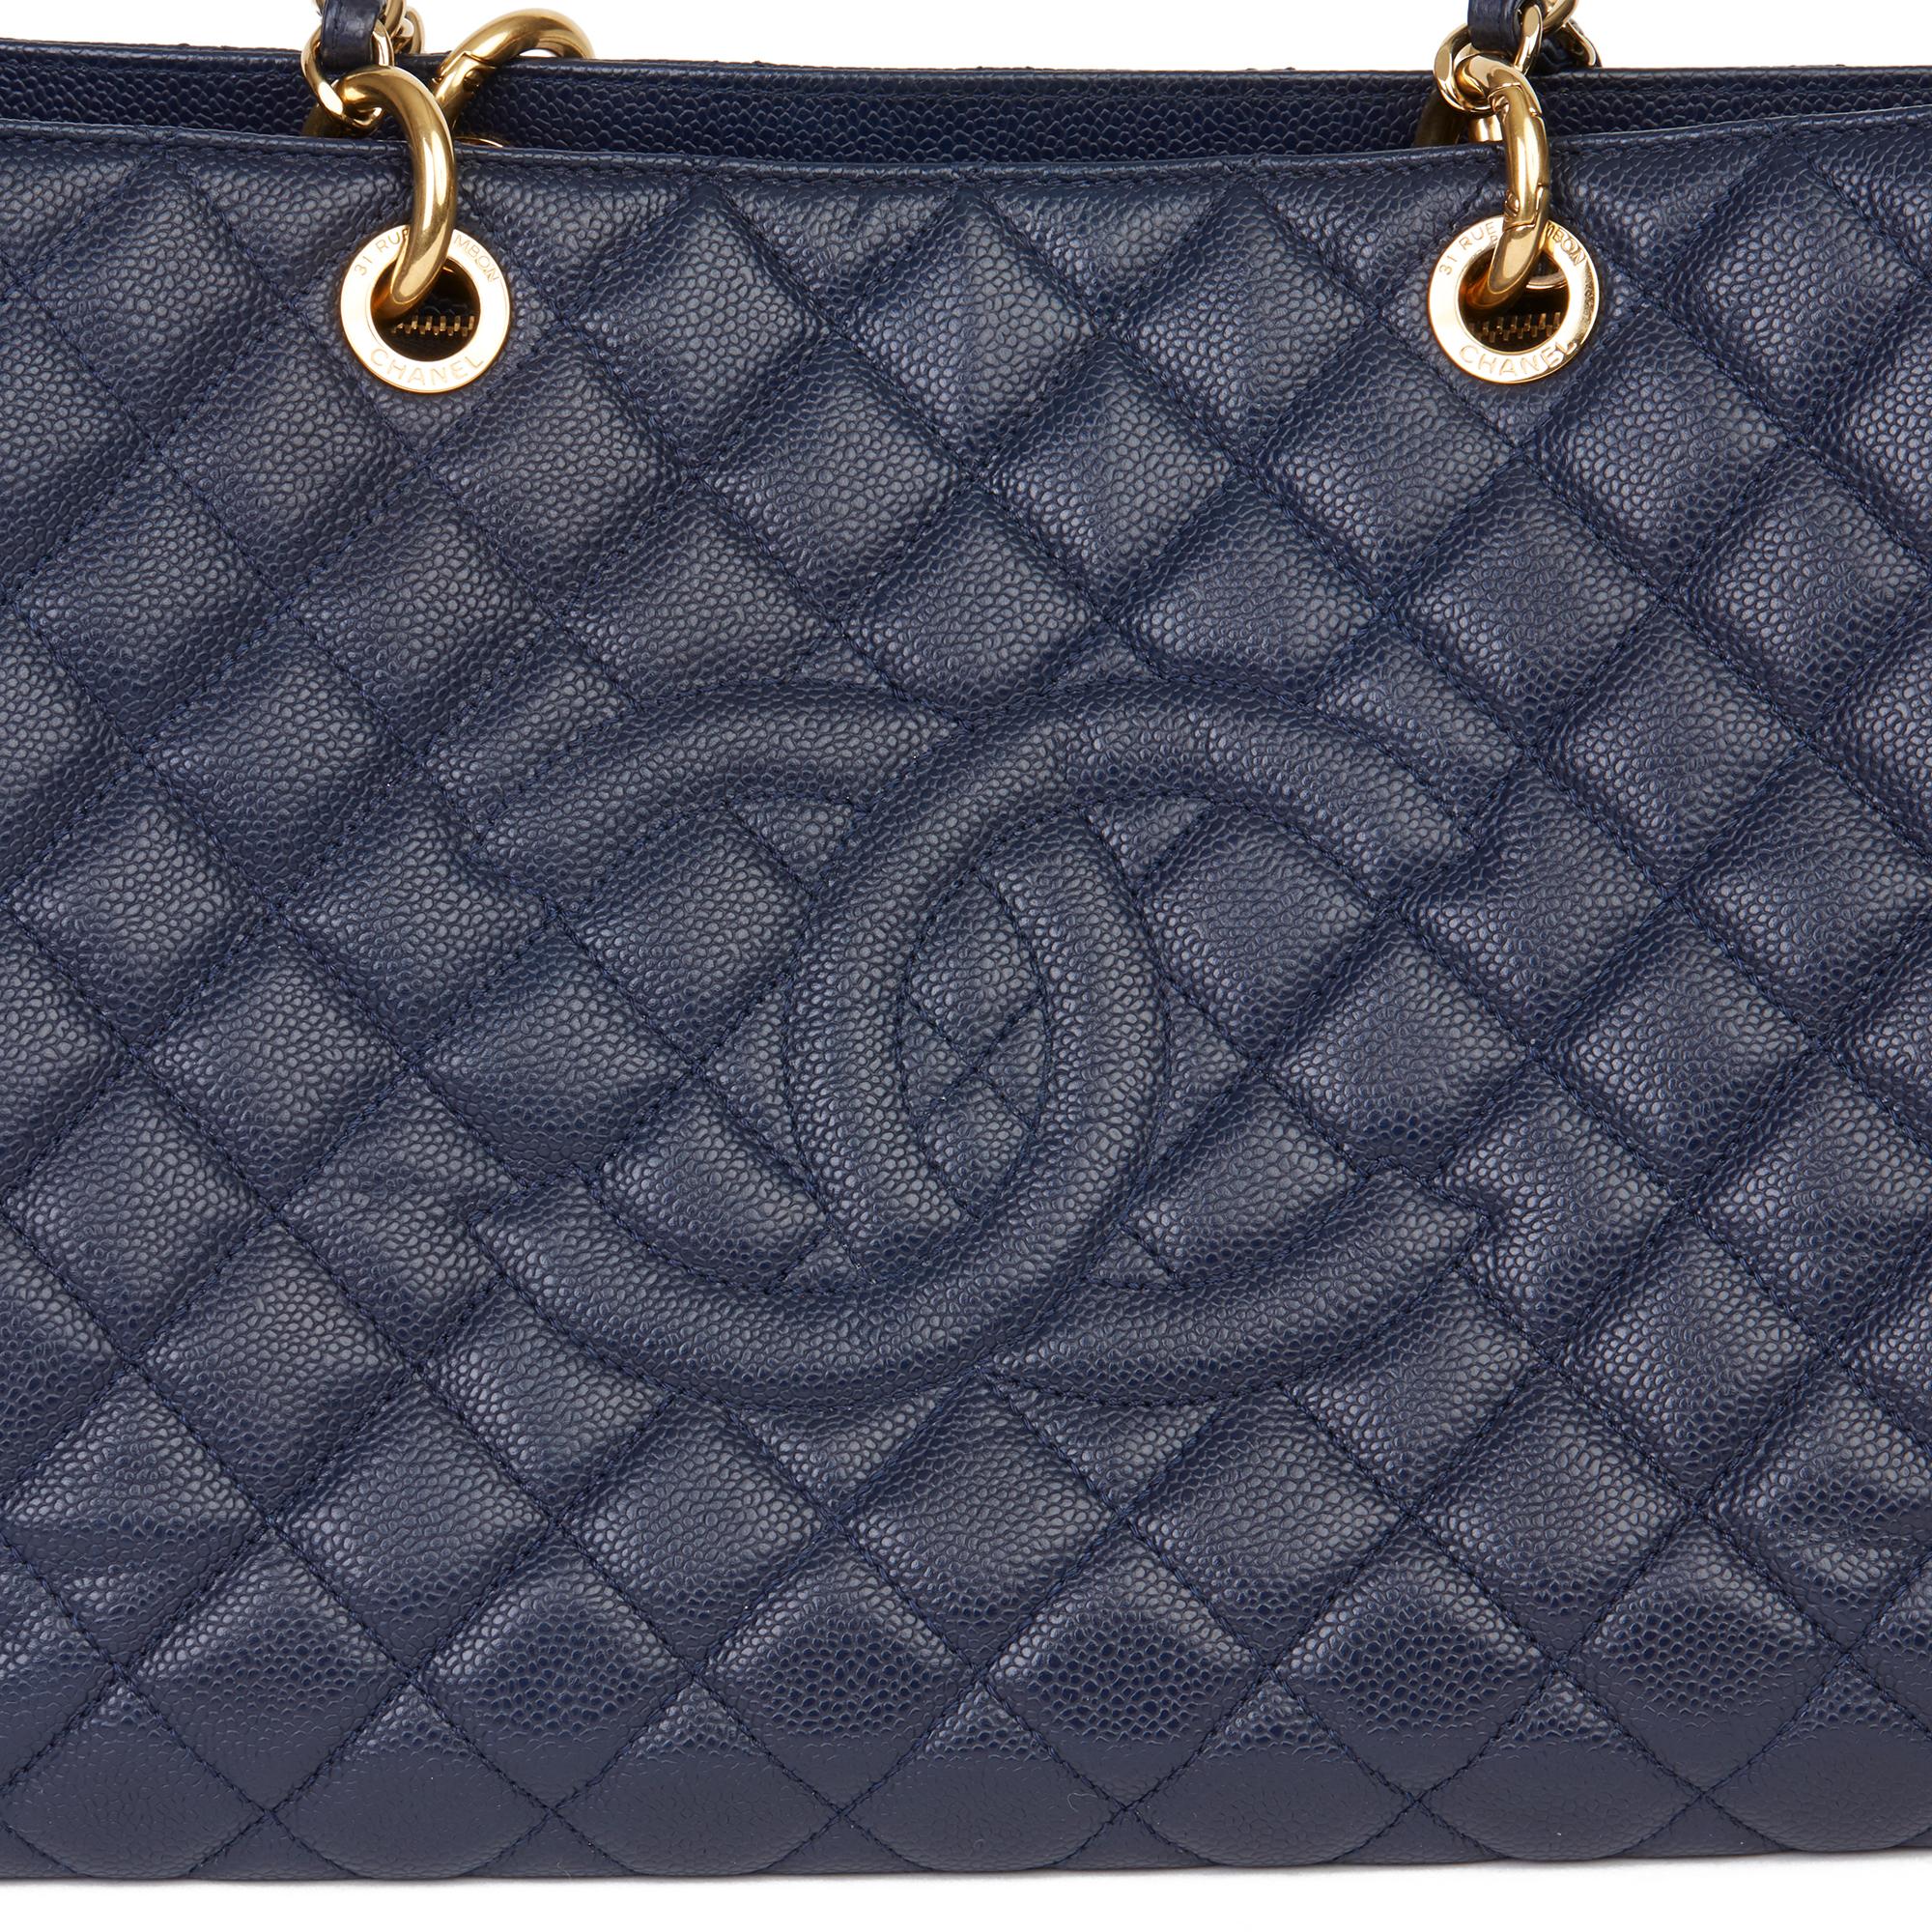 2014 Chanel Navy Quilted Caviar Leather Grand Shopping Tote XL GST 1